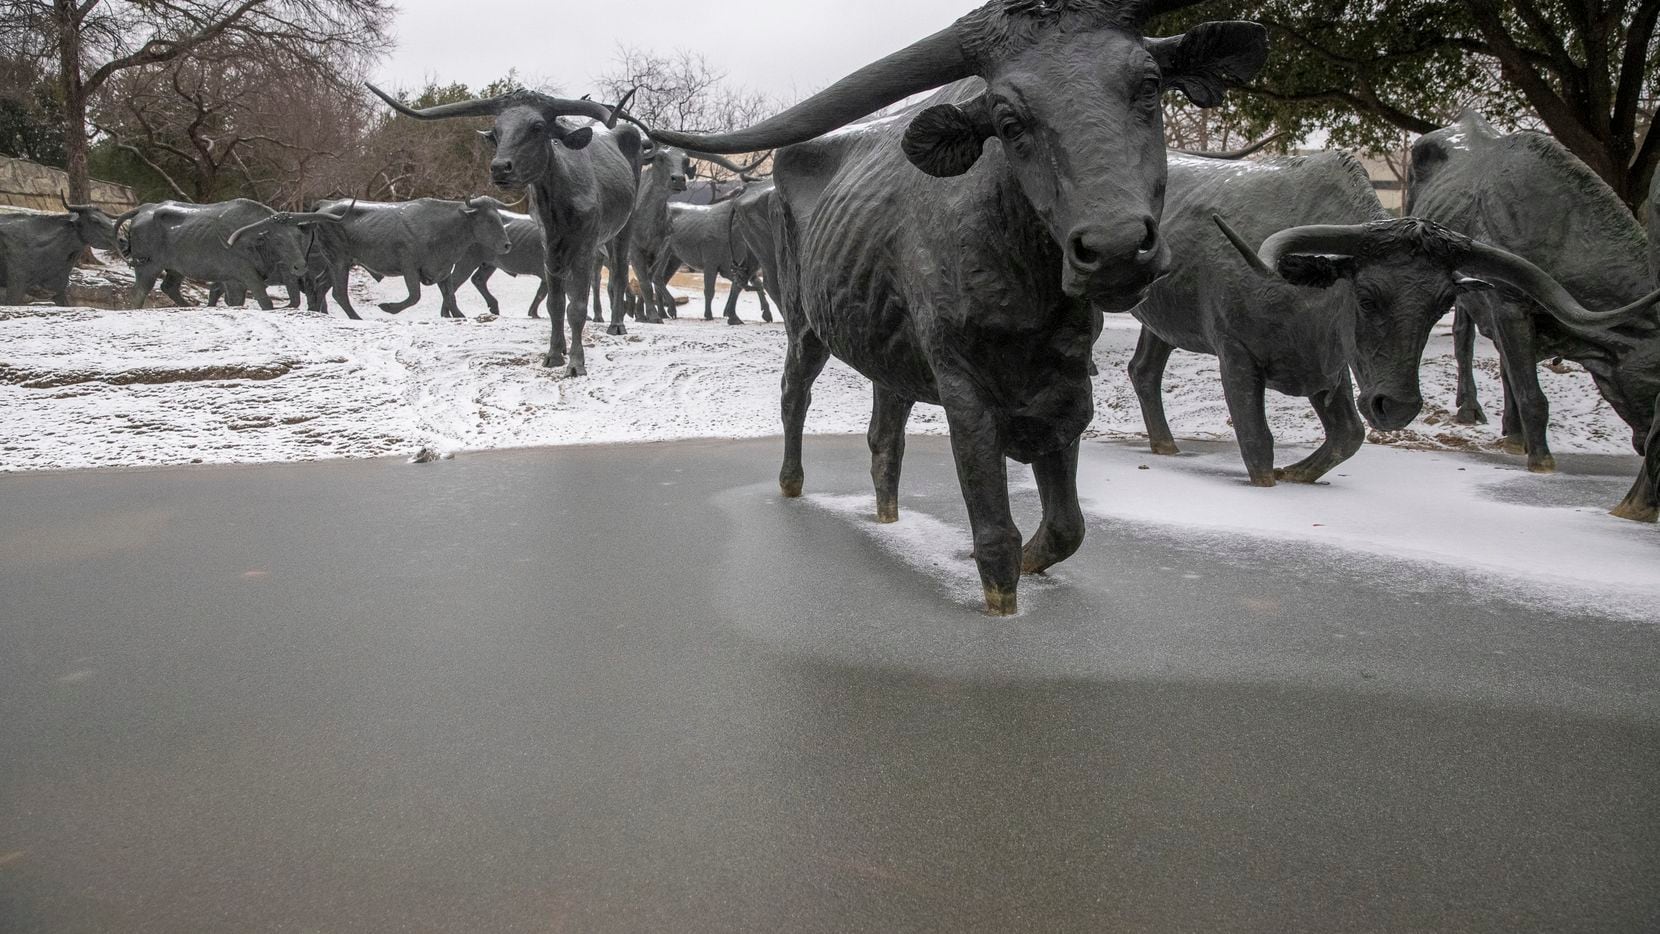 The water is frozen over at the cattle drive statues at The Plaza in front of the Dallas Convention Center in downtown Dallas on Sunday, Feb. 14, 2021, in Dallas. The region is currently under a winter storm warning. (Lynda M. González/The Dallas Morning News)